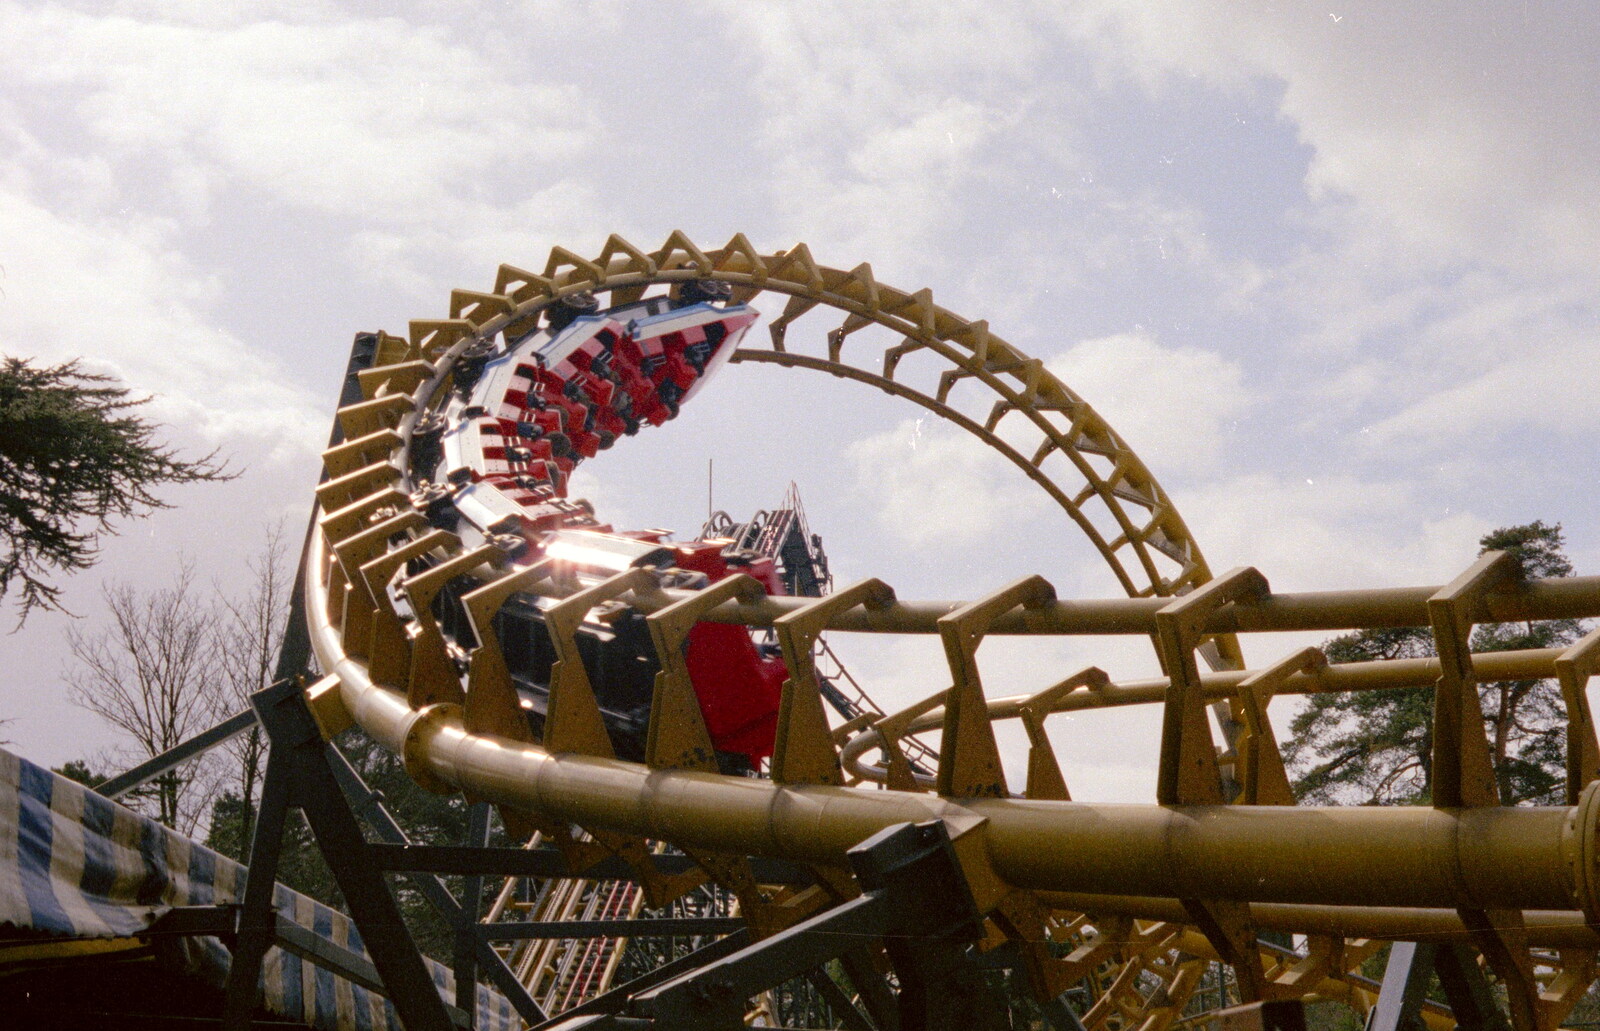 The Corkscrew rollercoaster from Easter With Sean in Macclesfield, Cheshire - 6th April 1986